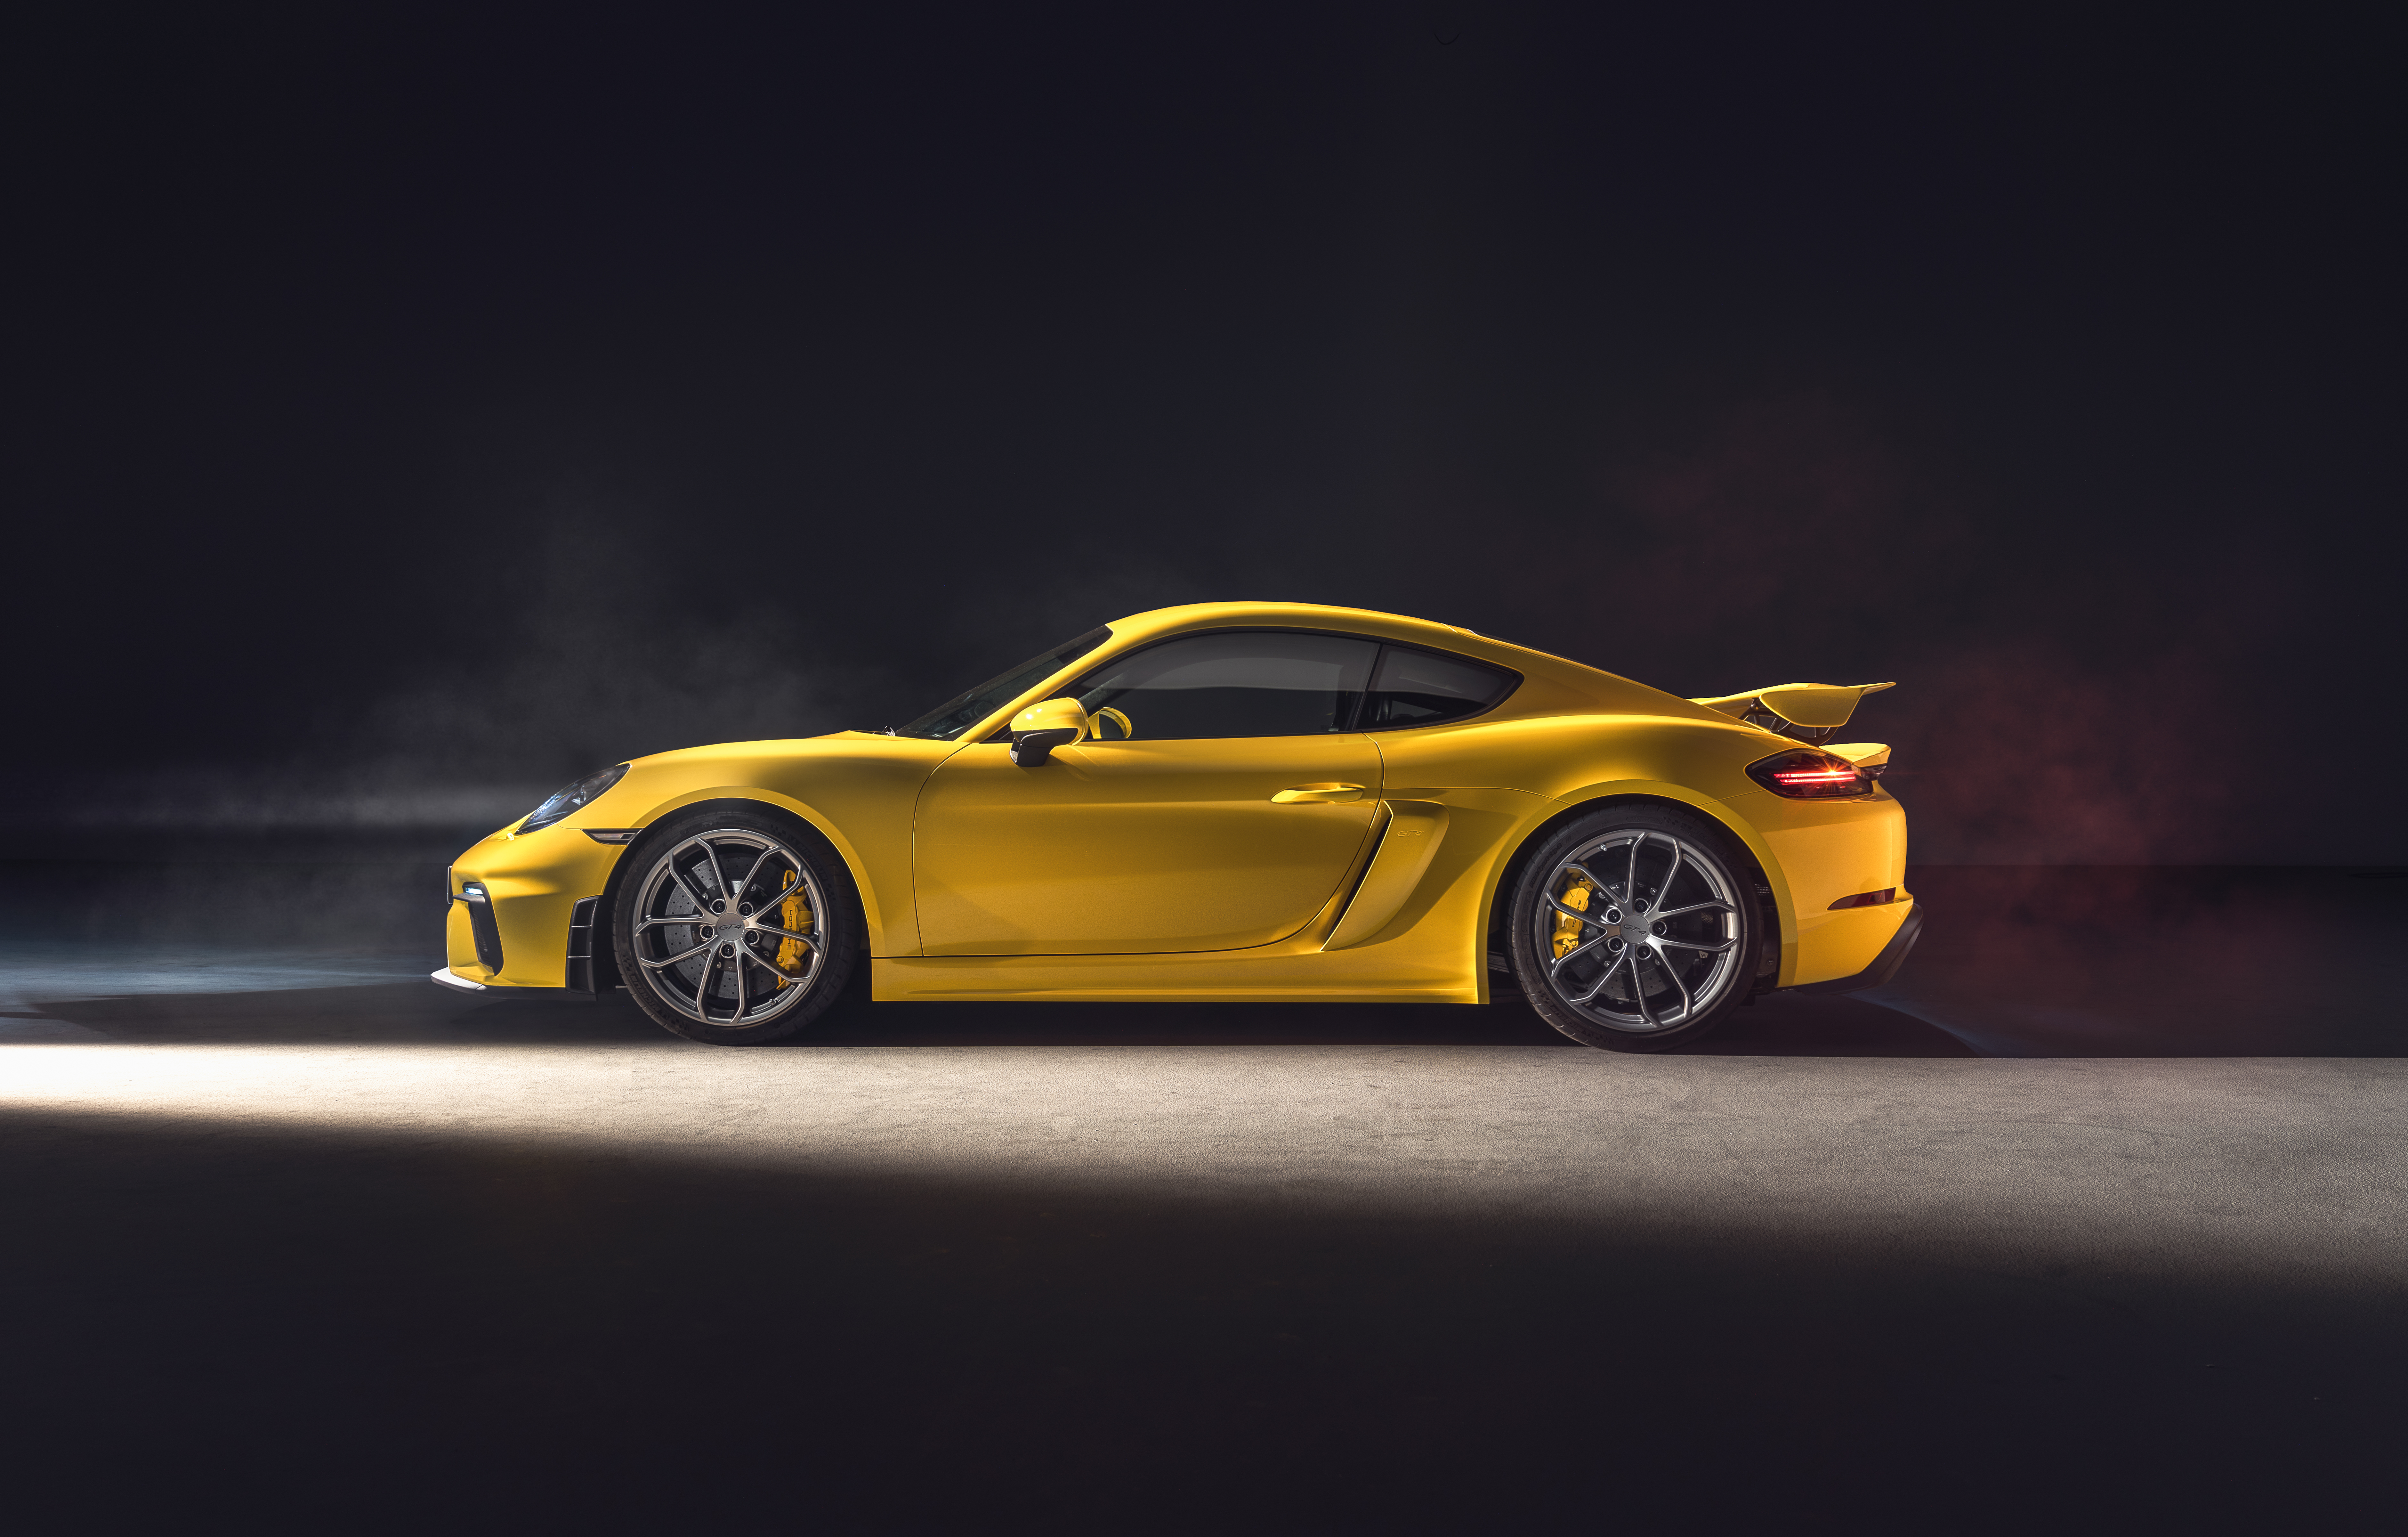 Pure Fun The Porsche Cayman Gt4 And Spyder Dr Ing